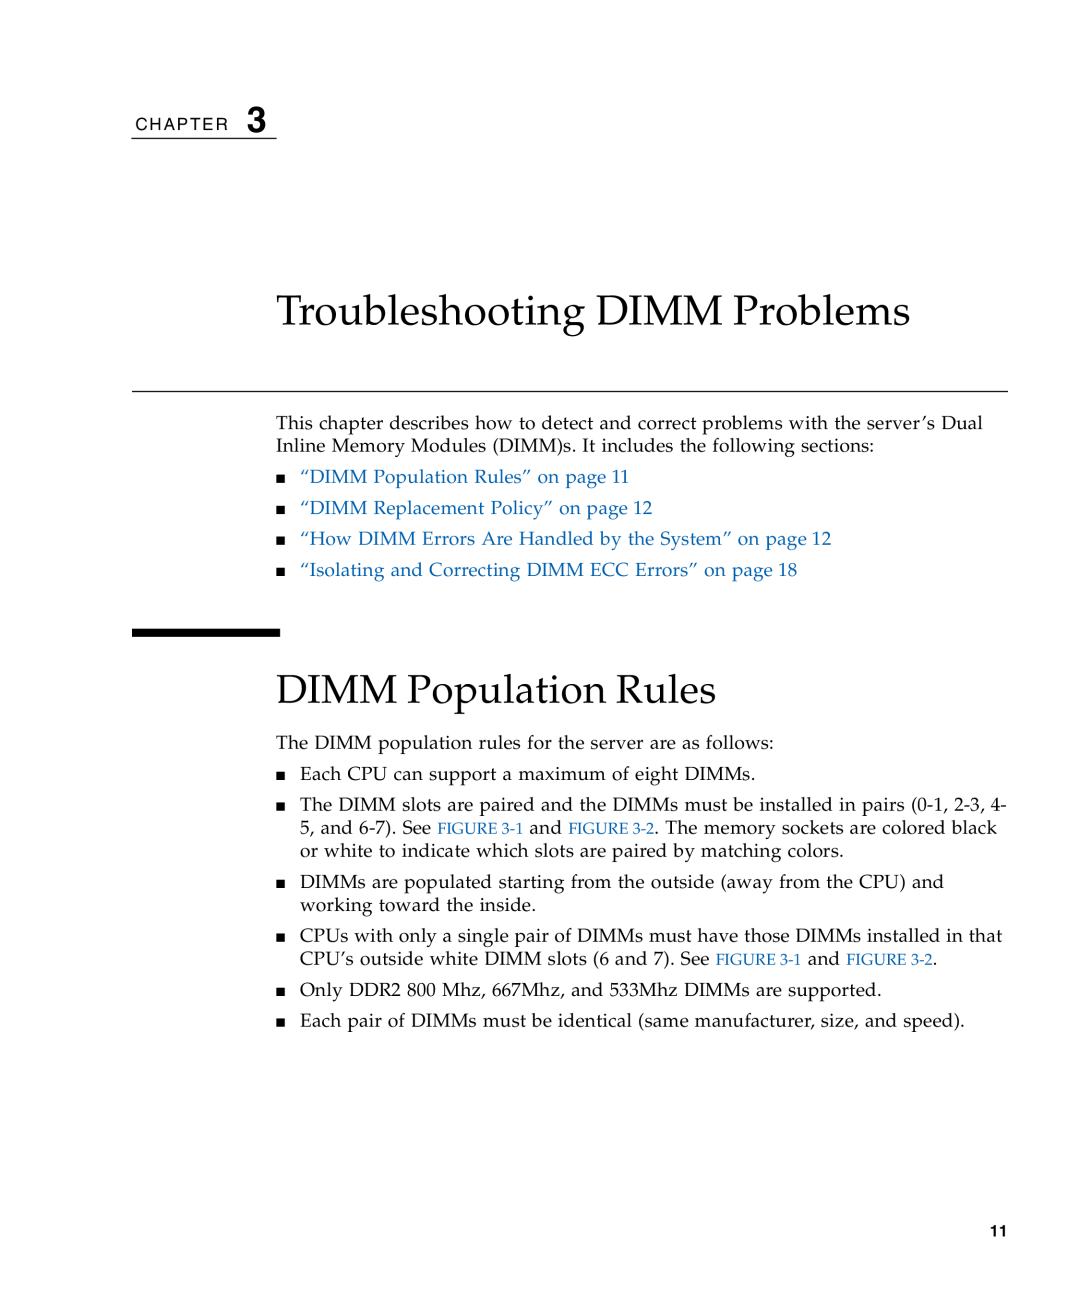 Sun Microsystems X4240, X4440, X4140 manual Troubleshooting DIMM Problems, DIMM Population Rules 